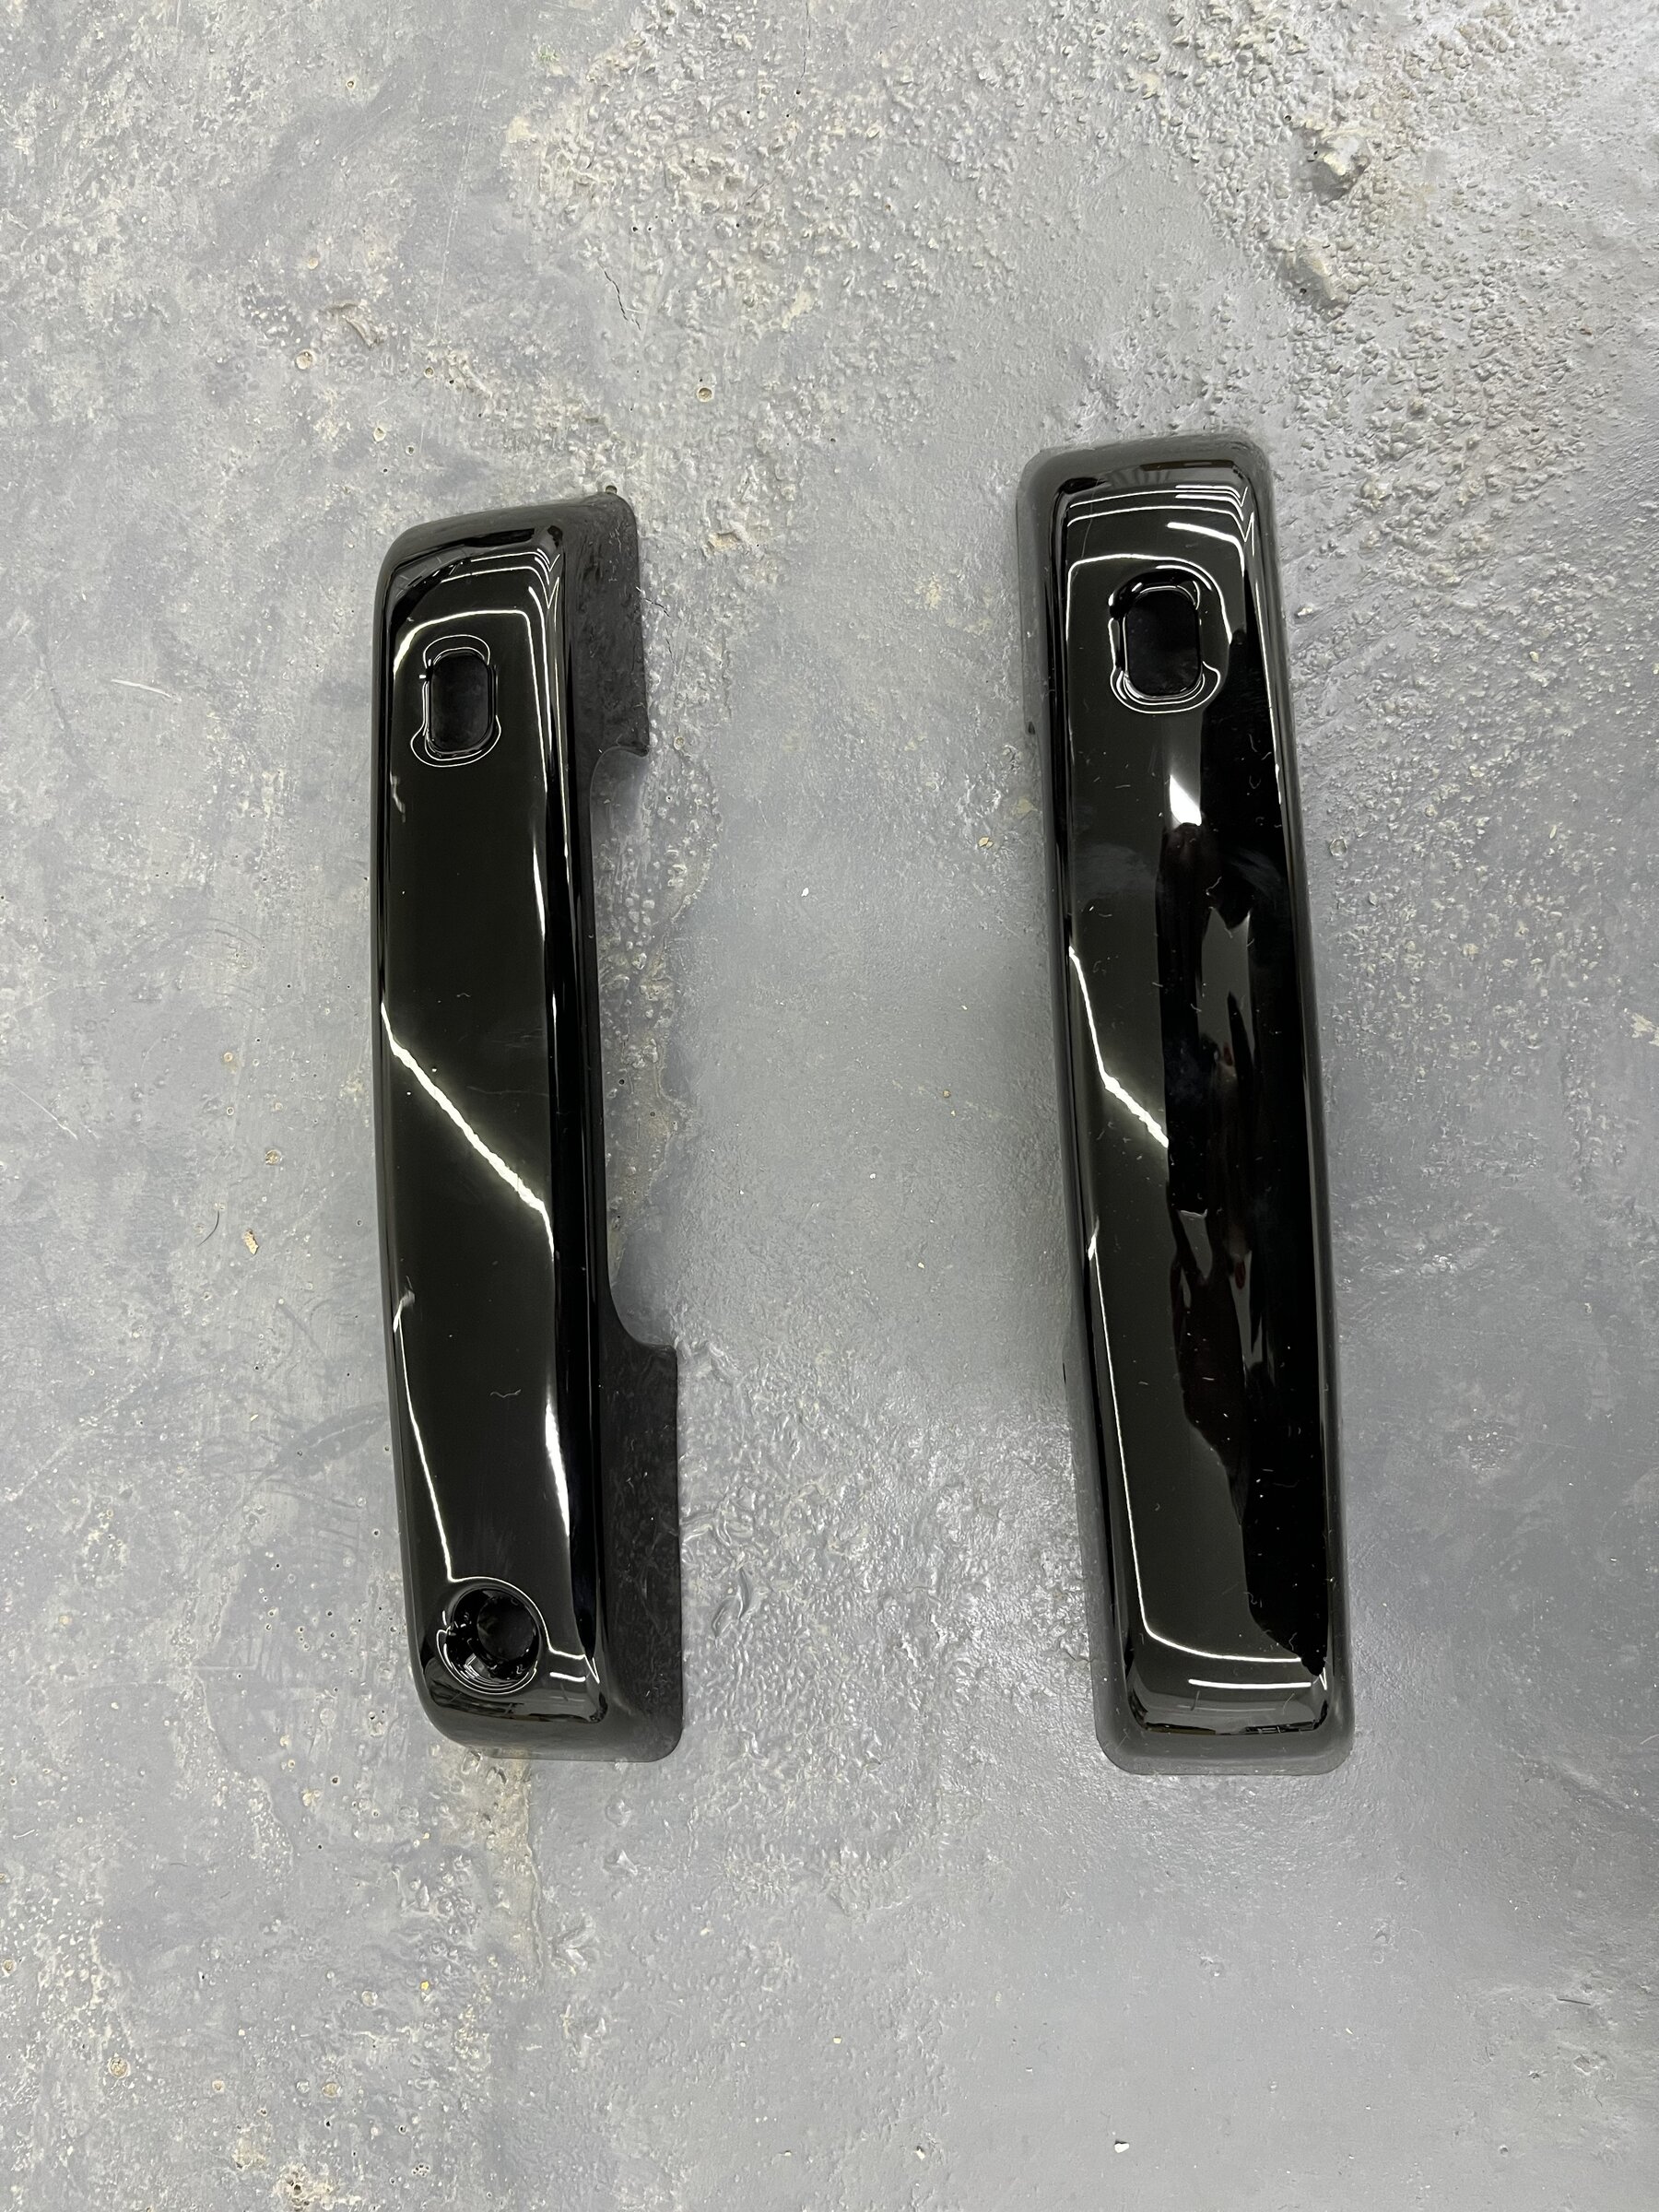 Ford Bronco Mabett releases "Door Handle Cover for Ford Bronco" Available on Amazon IMG_1359.HEIC.JPG